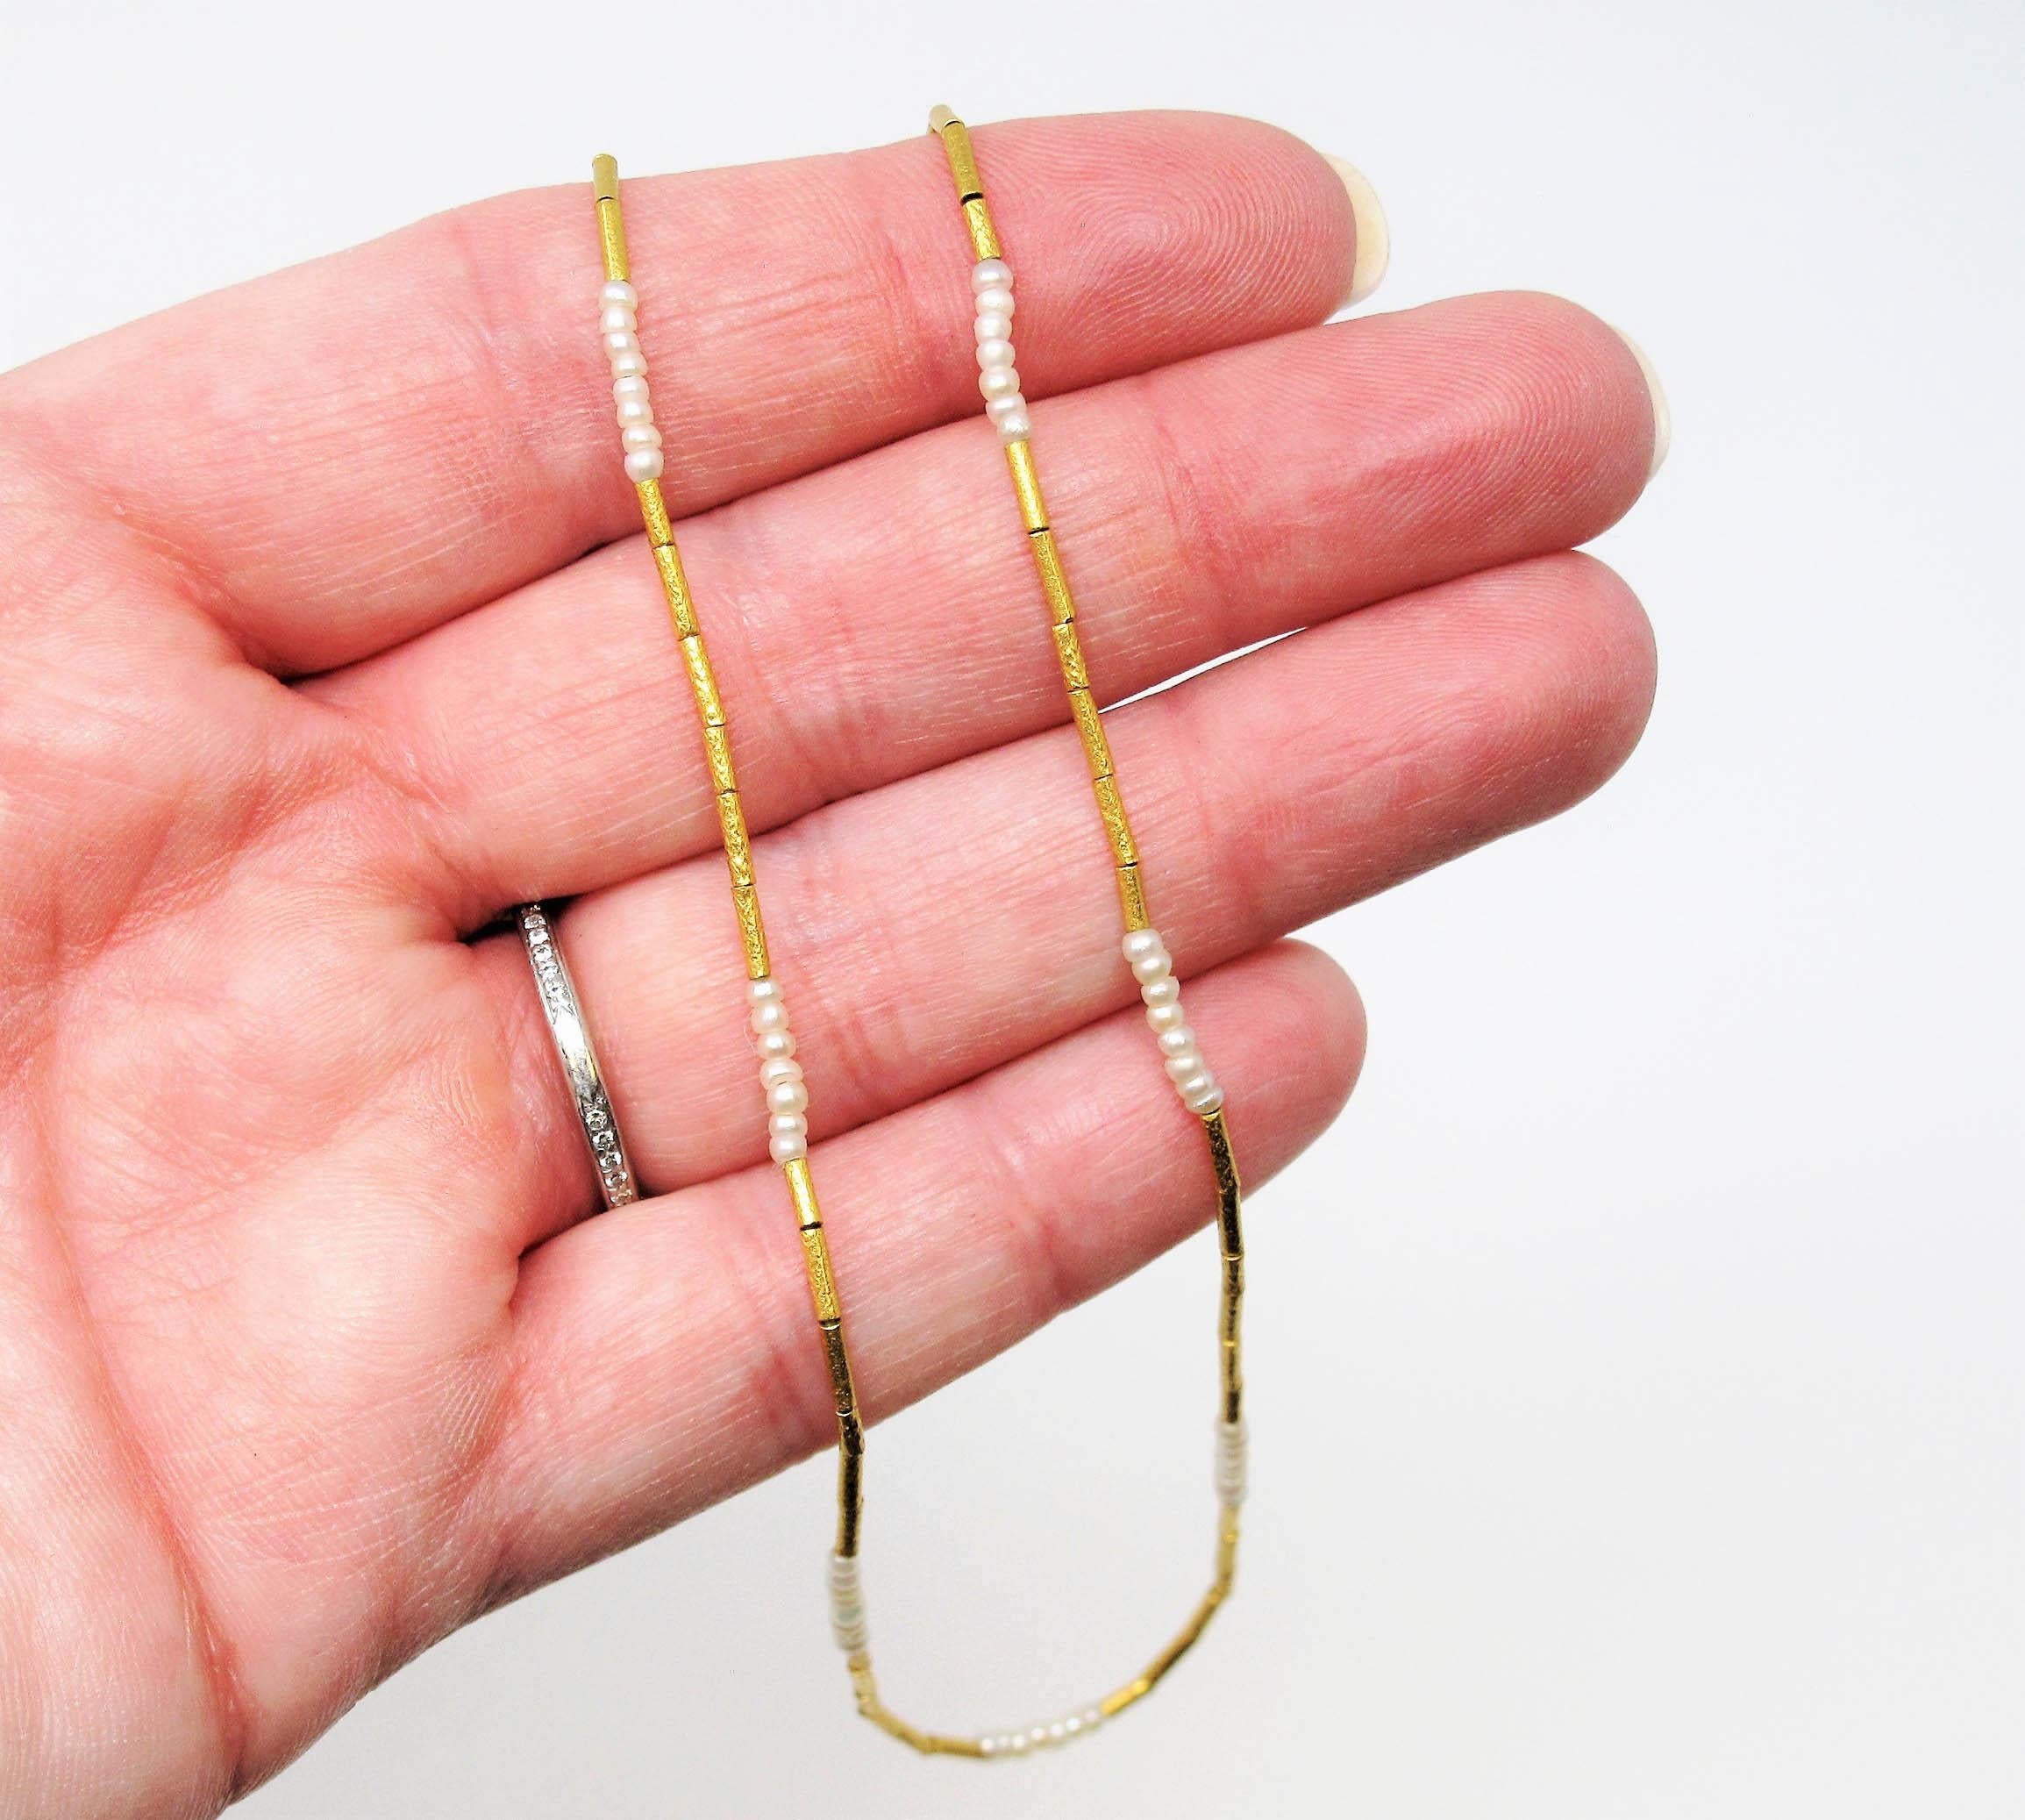 This beautiful single strand pearl station necklace by acclaimed jeweler Gurhan is the essence of minimalist elegance. The delicate features and incredible attention to detail make for a simple, yet stunning highly feminine piece. Either worn on its